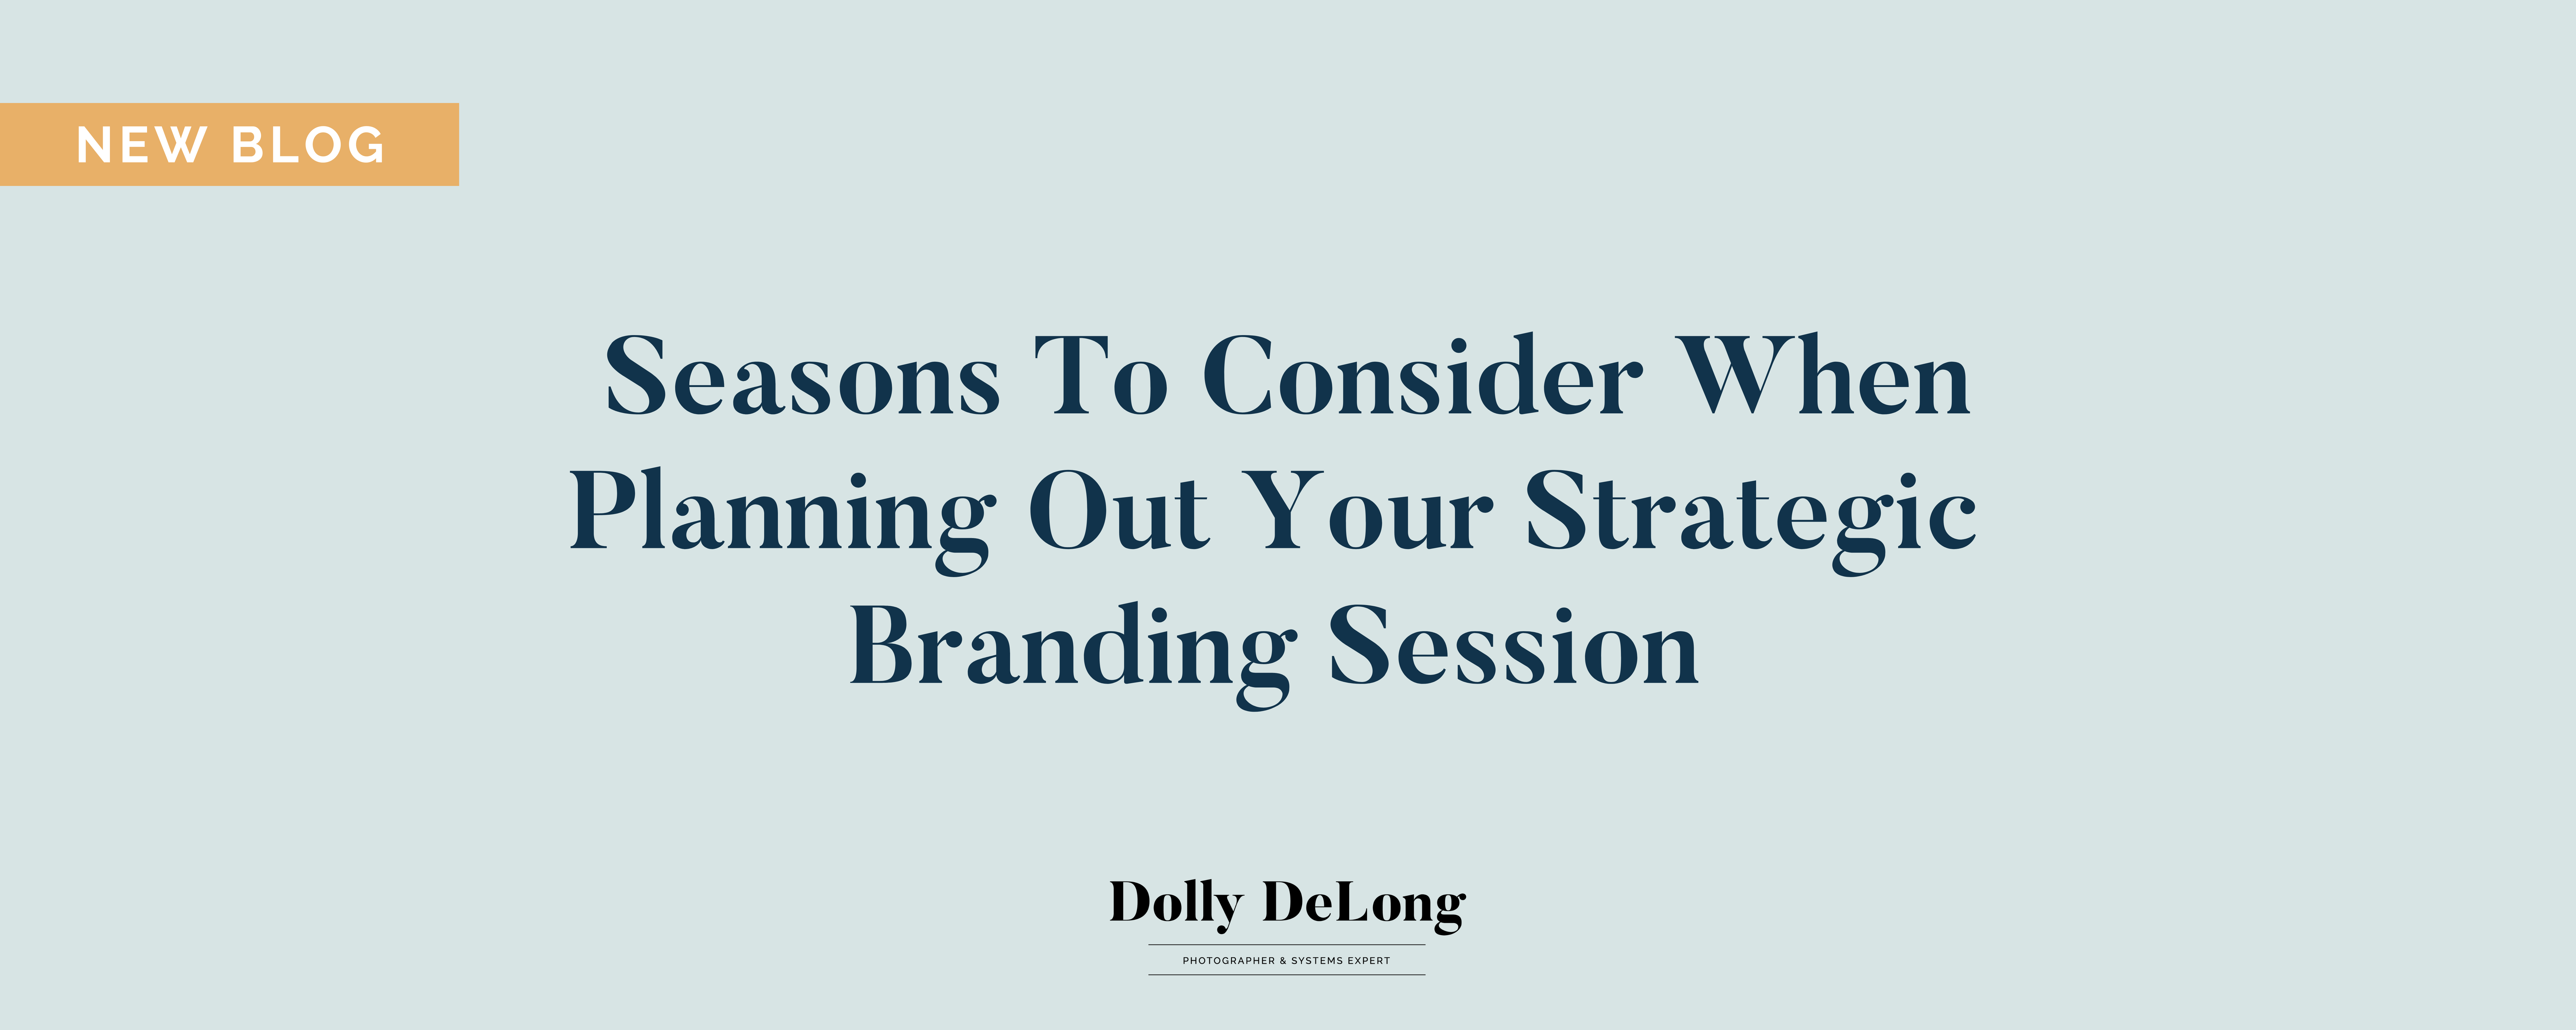 seasons_to_consider_when_planning_out_your_strategic_branding_session